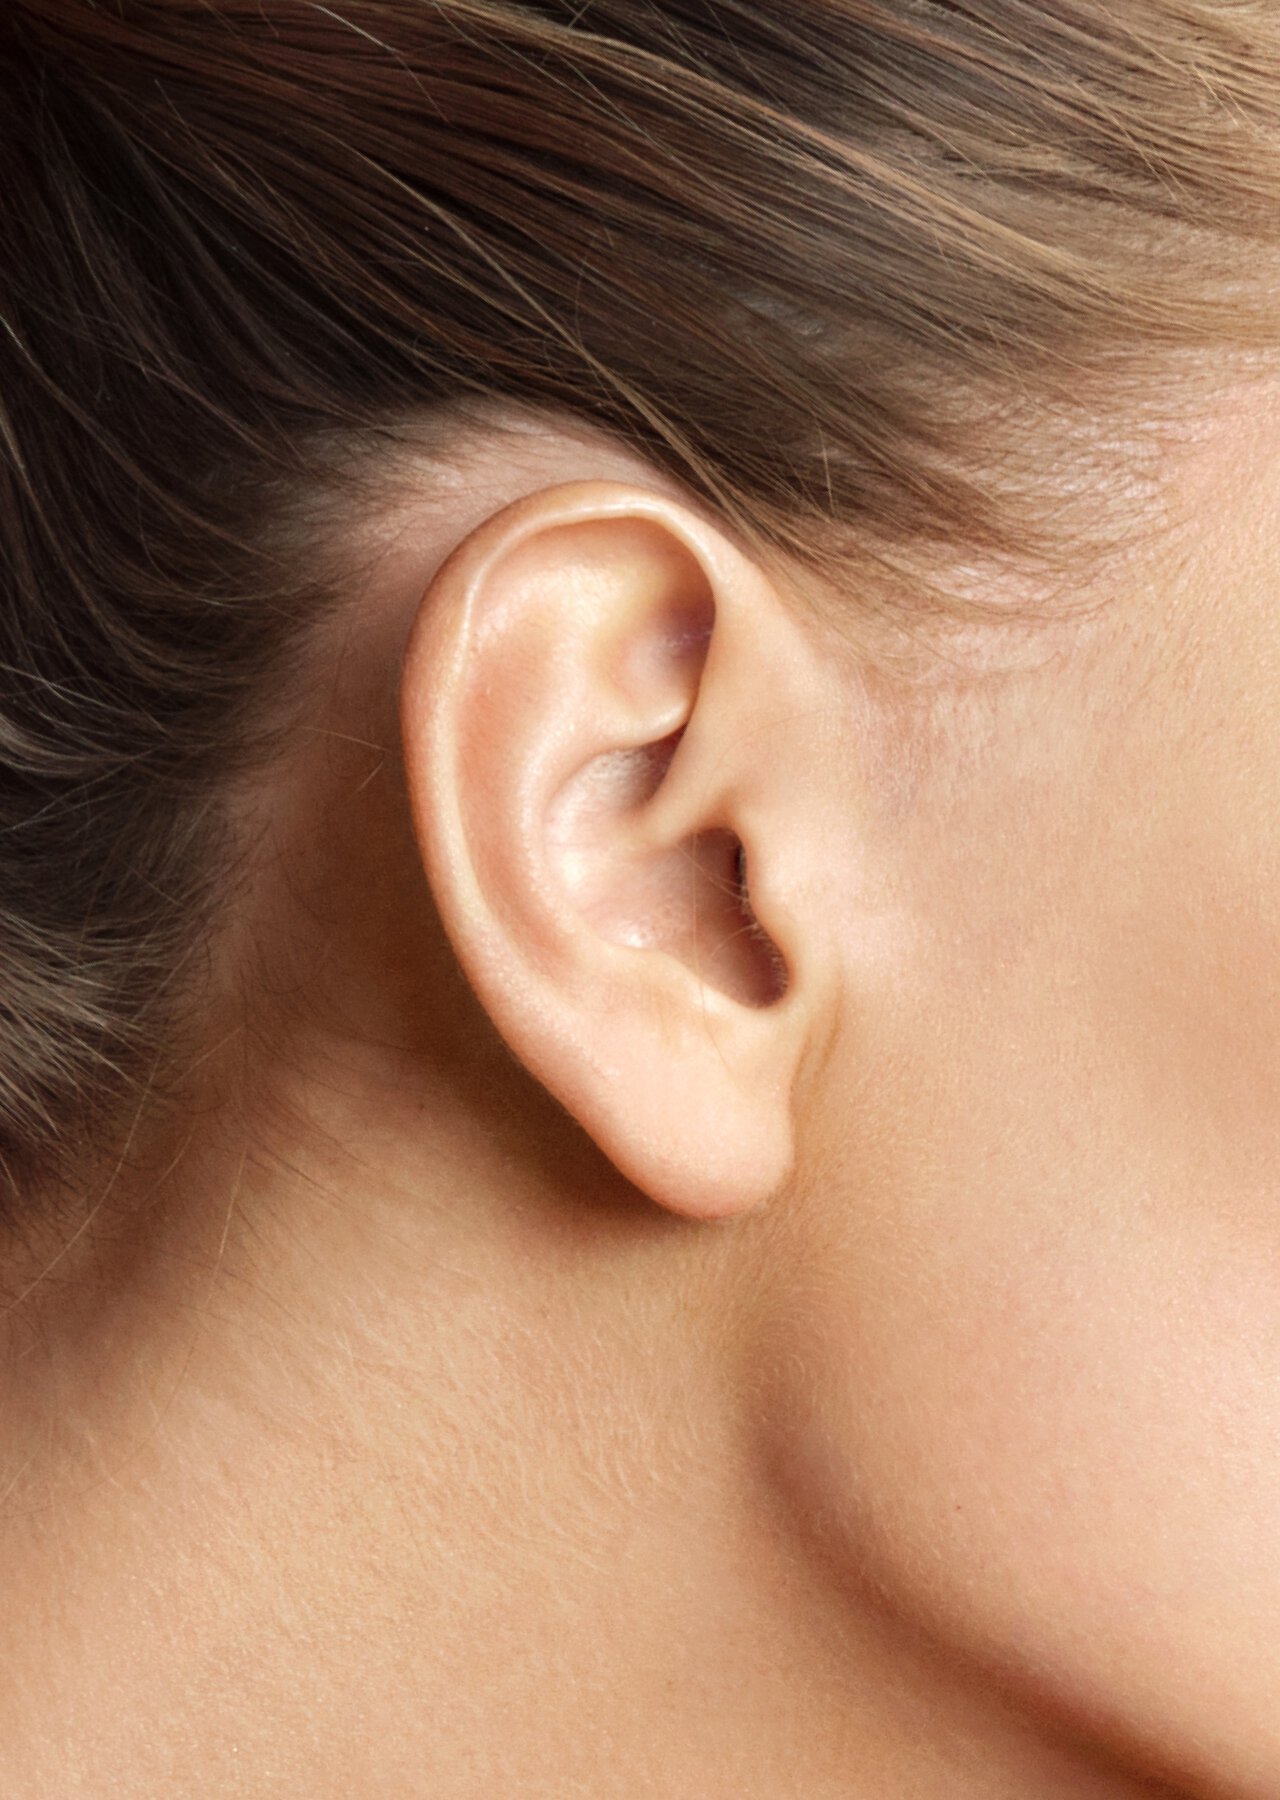 Close-up of ear of Hollywood earache treatment patient